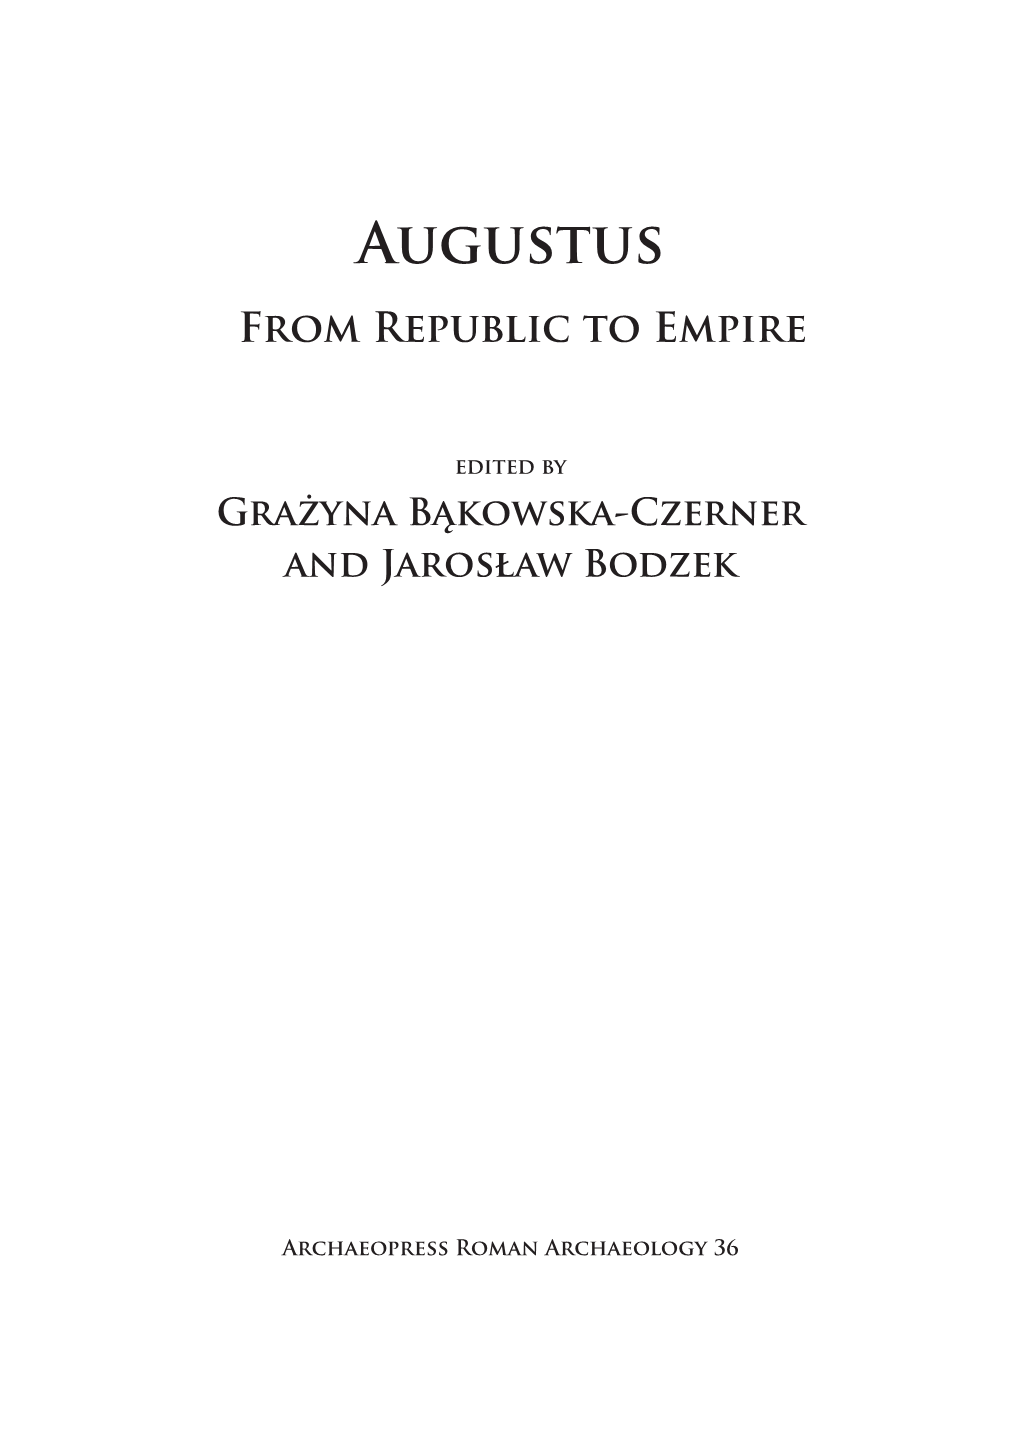 Augustus from Republic to Empire